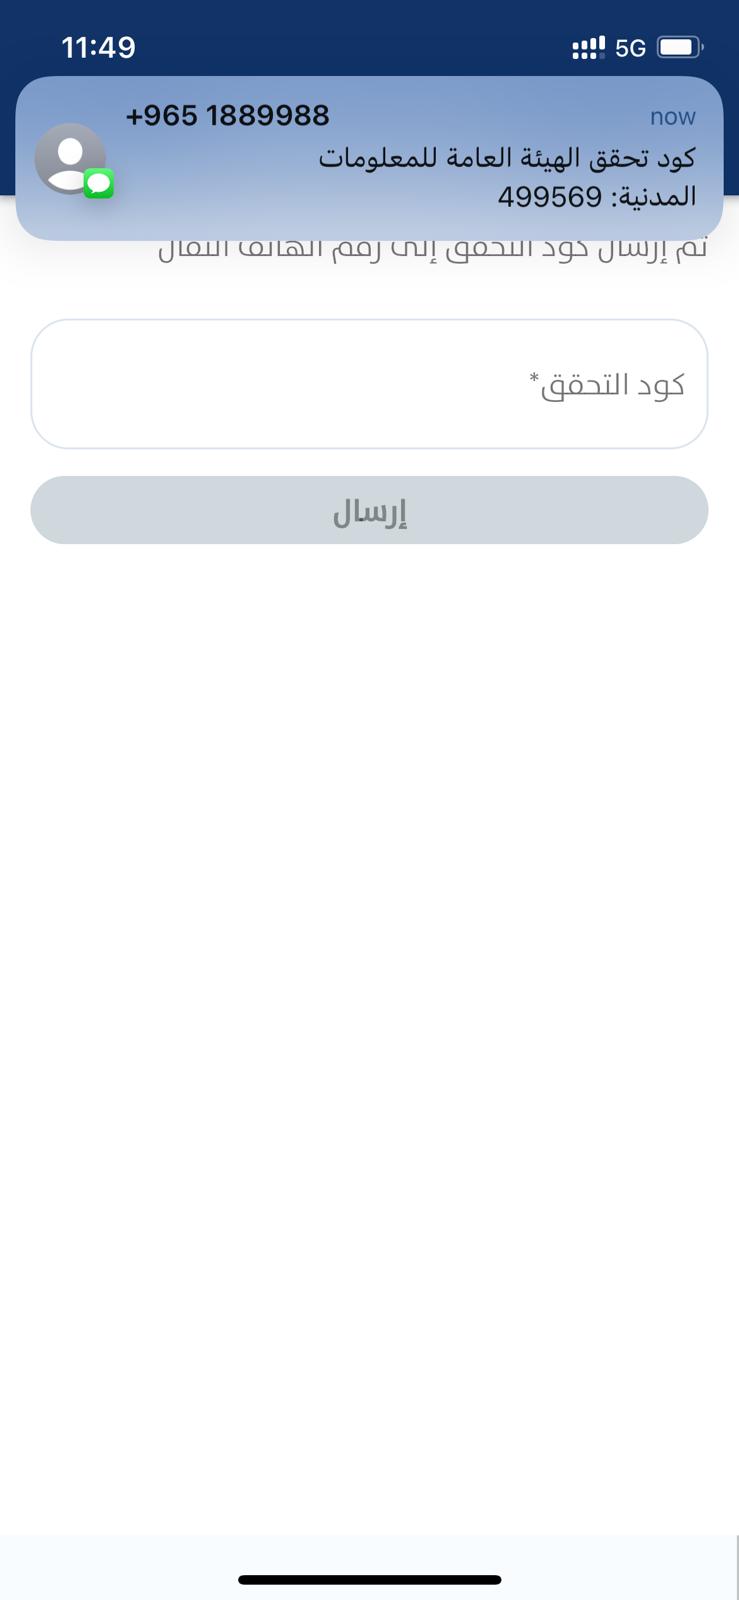 Updating mobile no IN PACI using sahel app - entering sms code